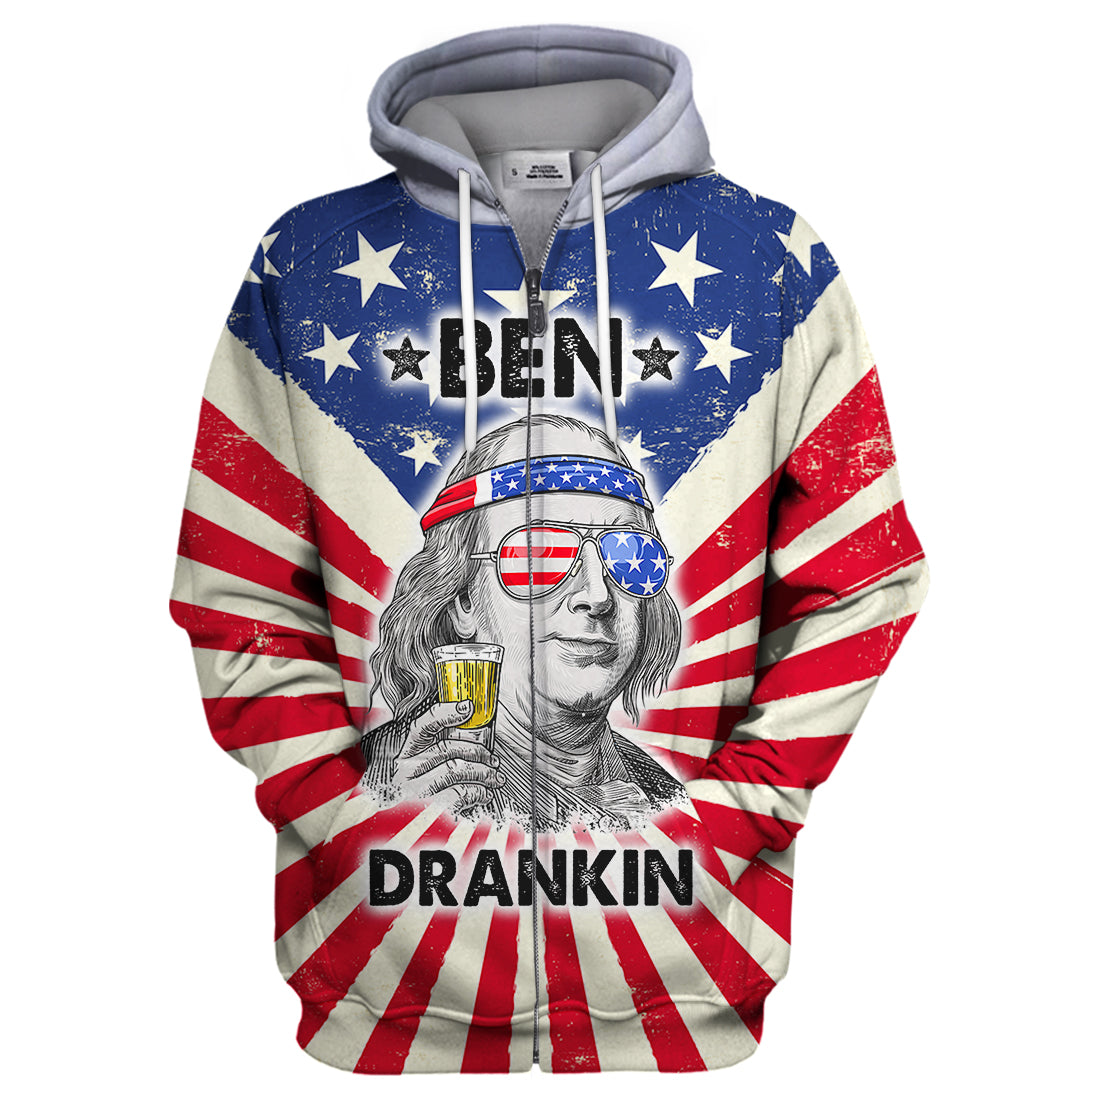 Unifinz 4th Of July Independence Day T-shirt 3D Print Ben Drankin T-shirt Awesome 4th Of July Hoodie Sweater Tank 2022